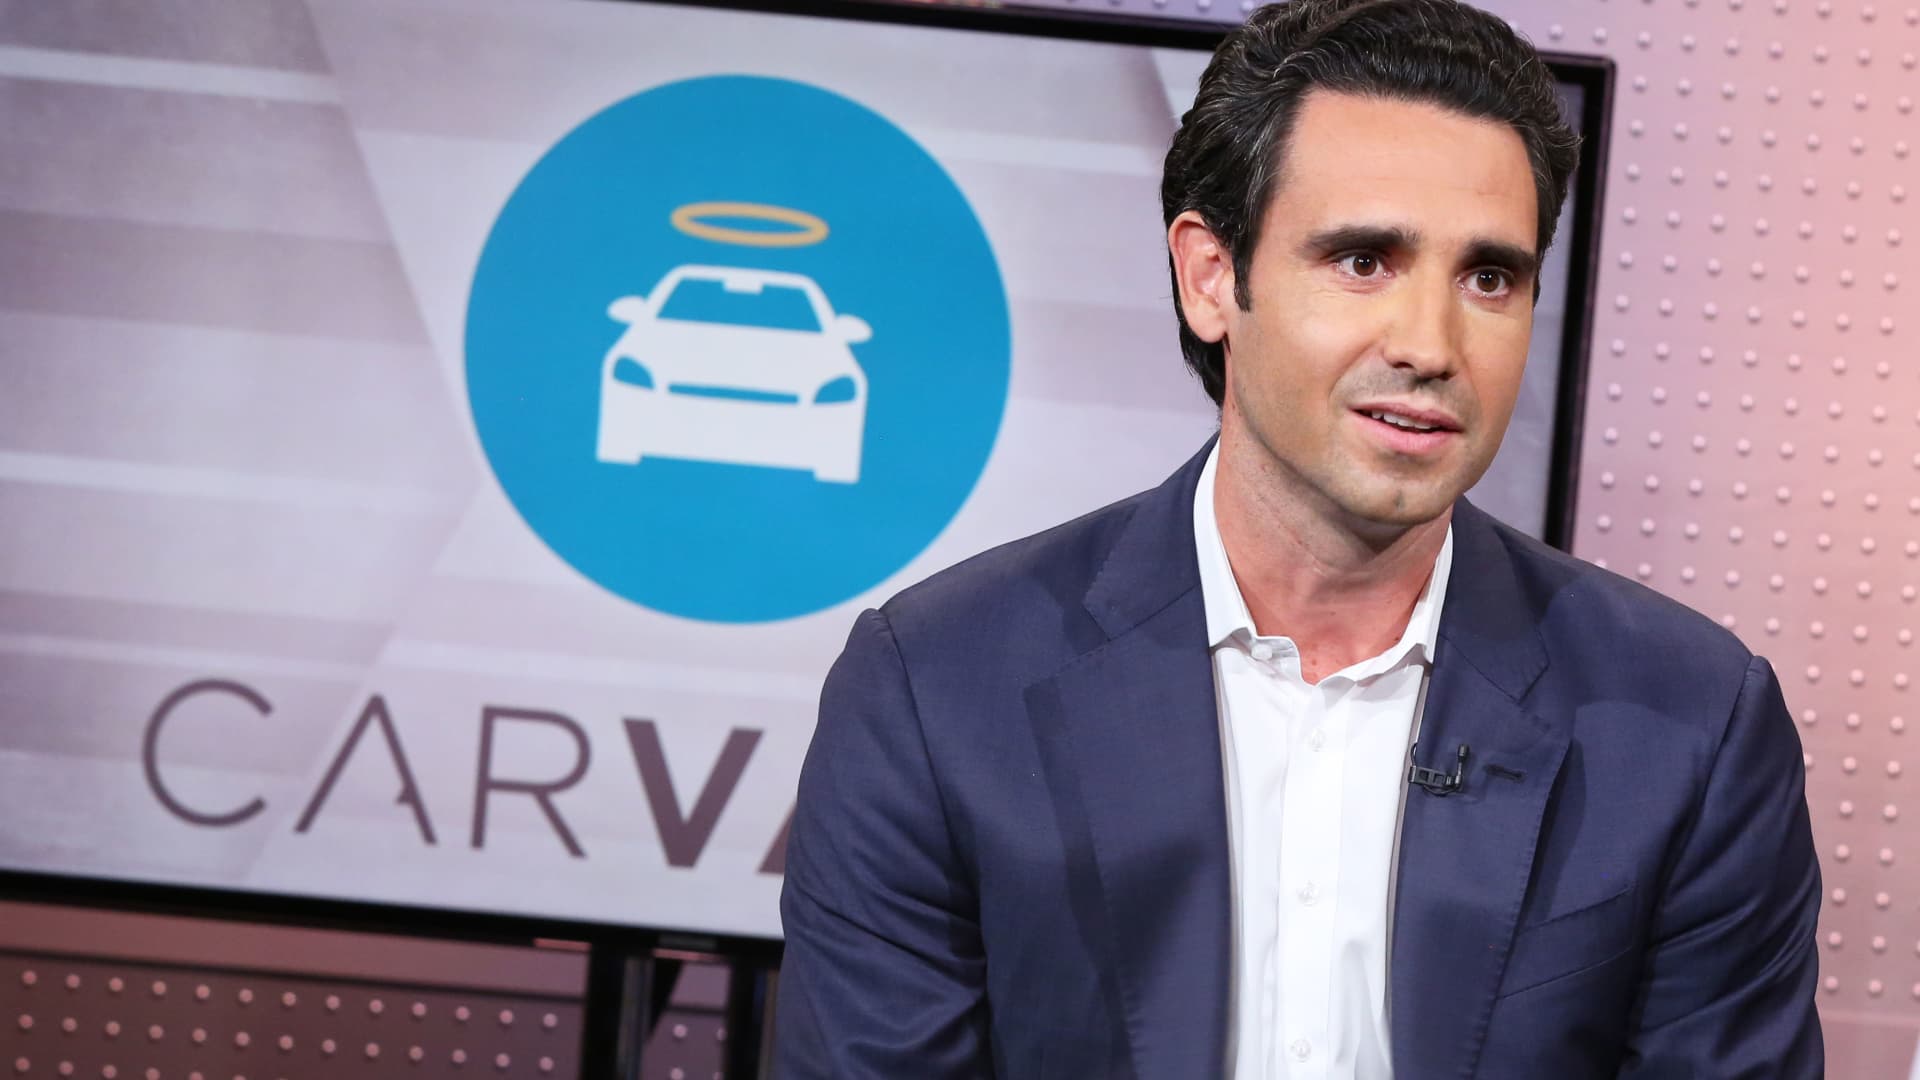 How Carvana went from a Wall Street top pick to trading with meme stocks